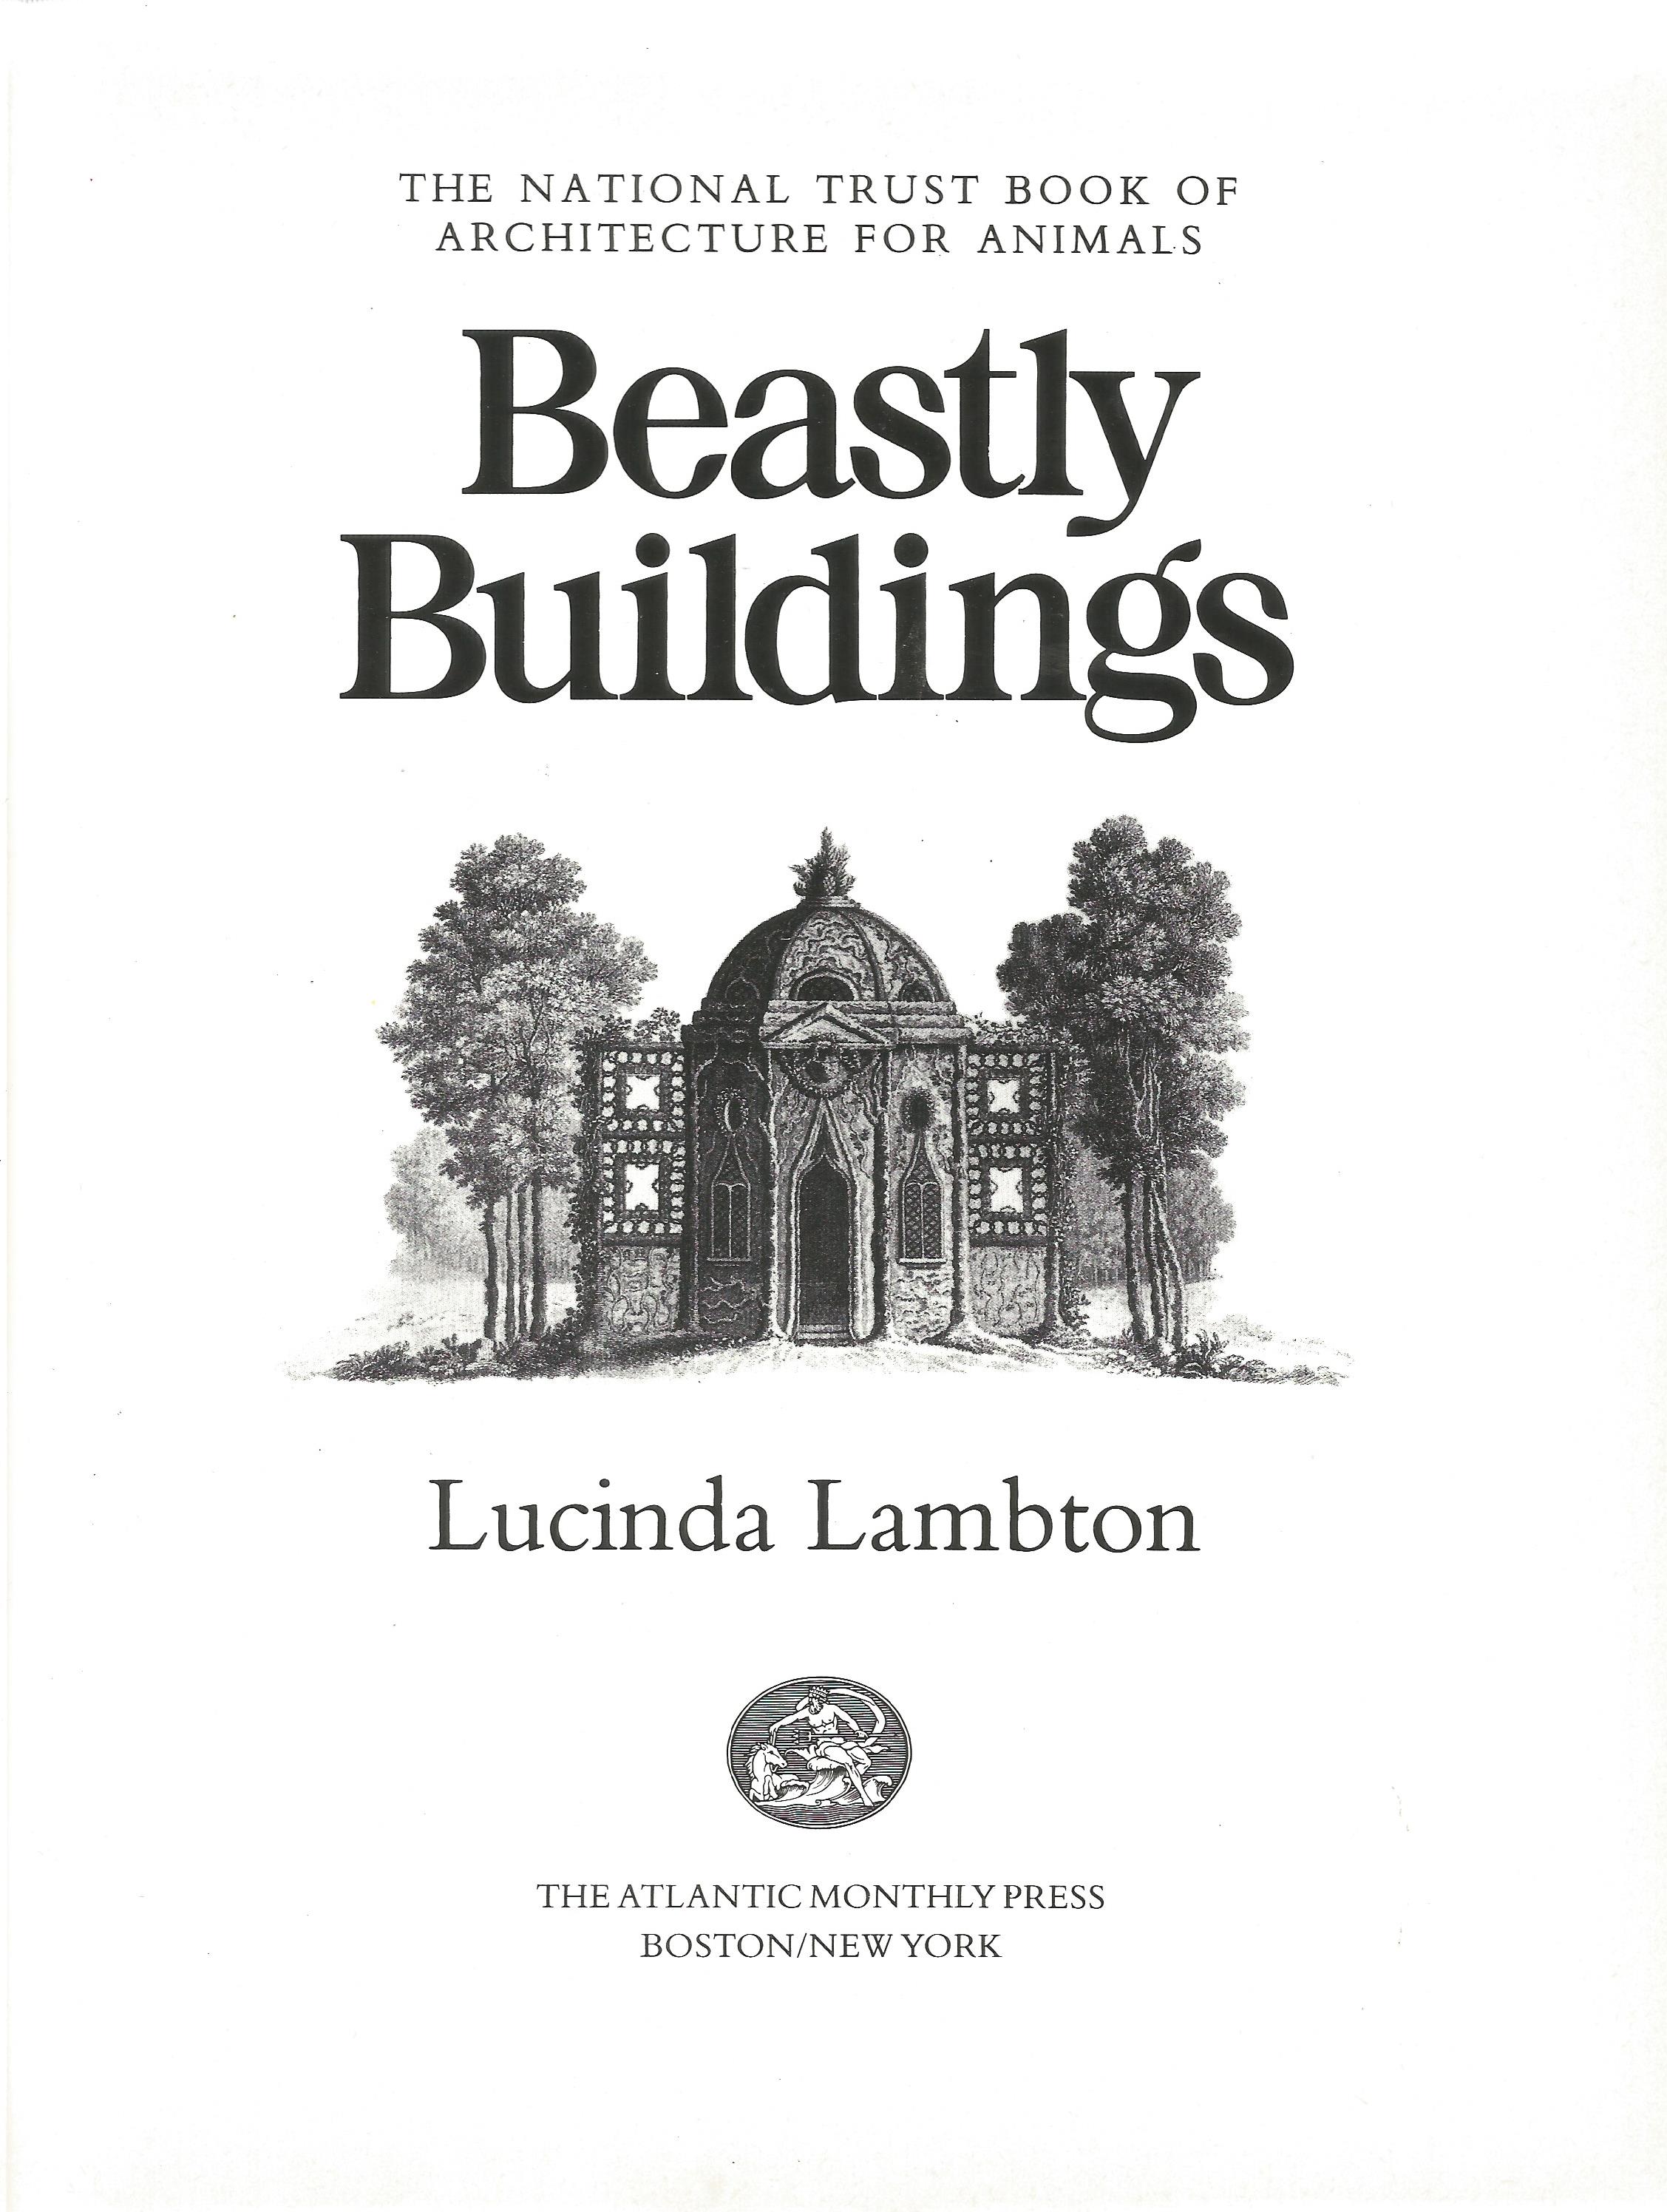 Lucinda Lambton hardback book Beastly Buildings 1985 published by The Atlantic Monthly Press in good - Image 2 of 2